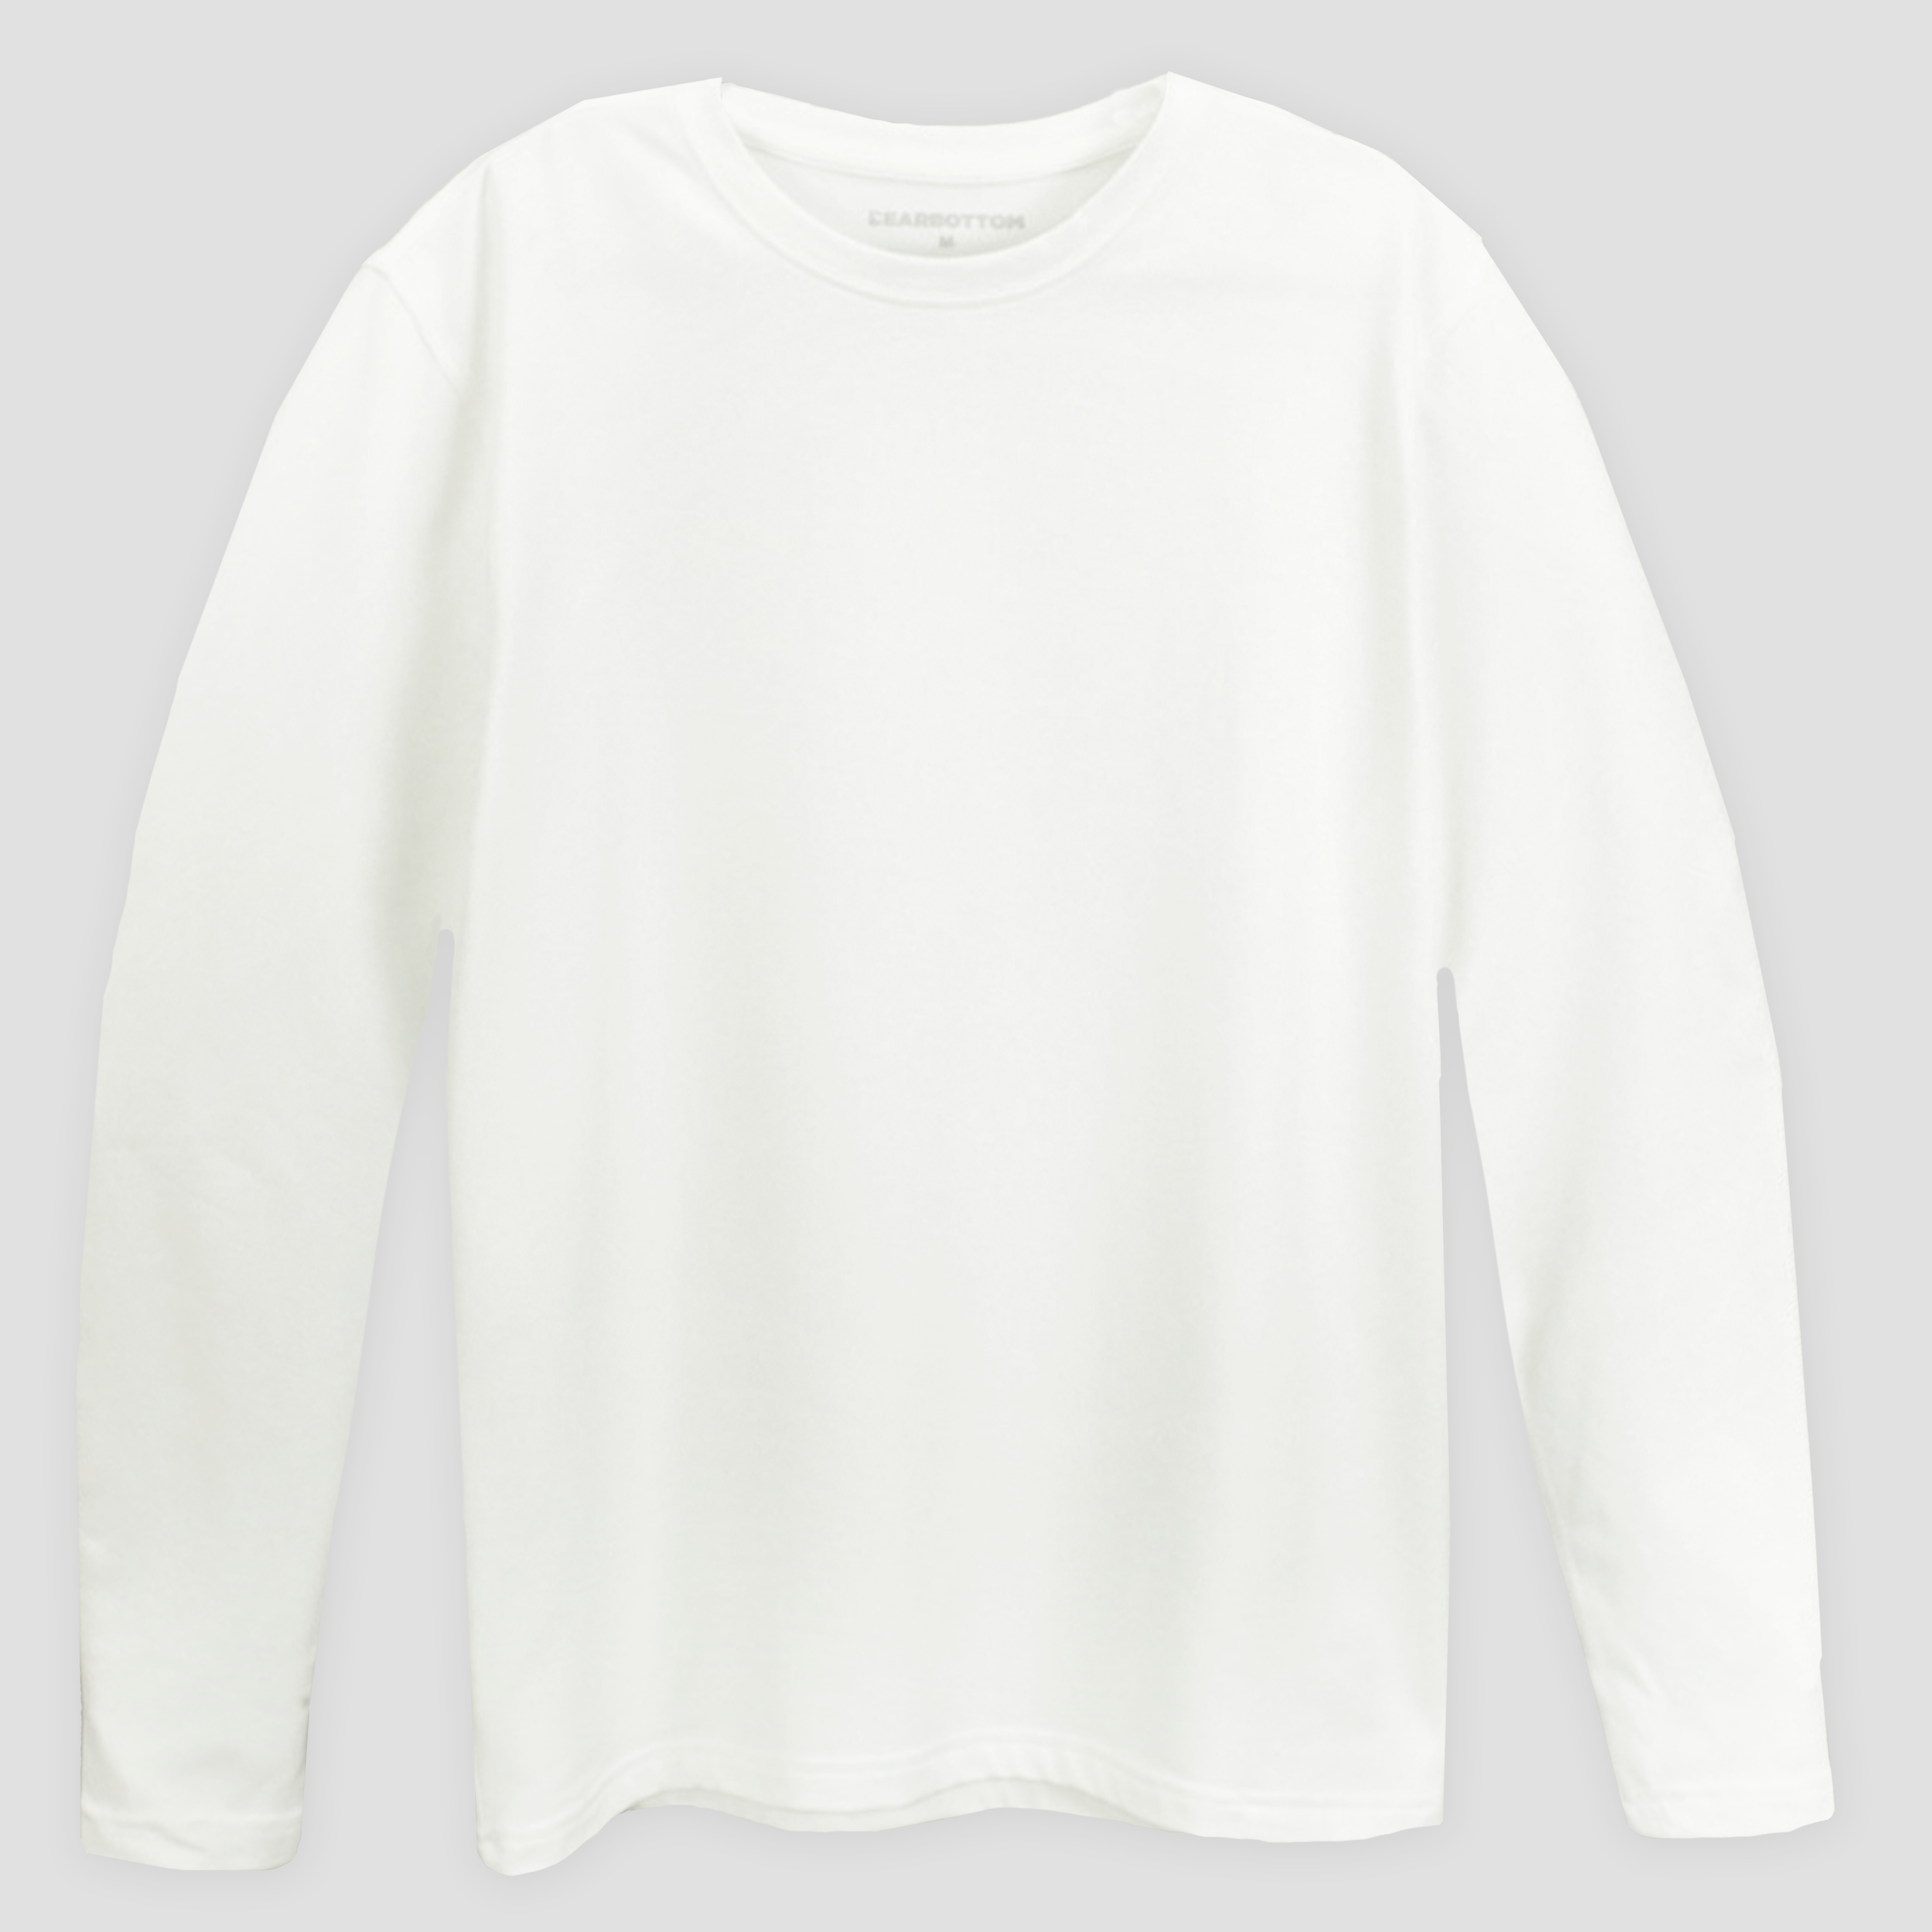 Long Sleeve Tech Tee Solid White front with crewneck